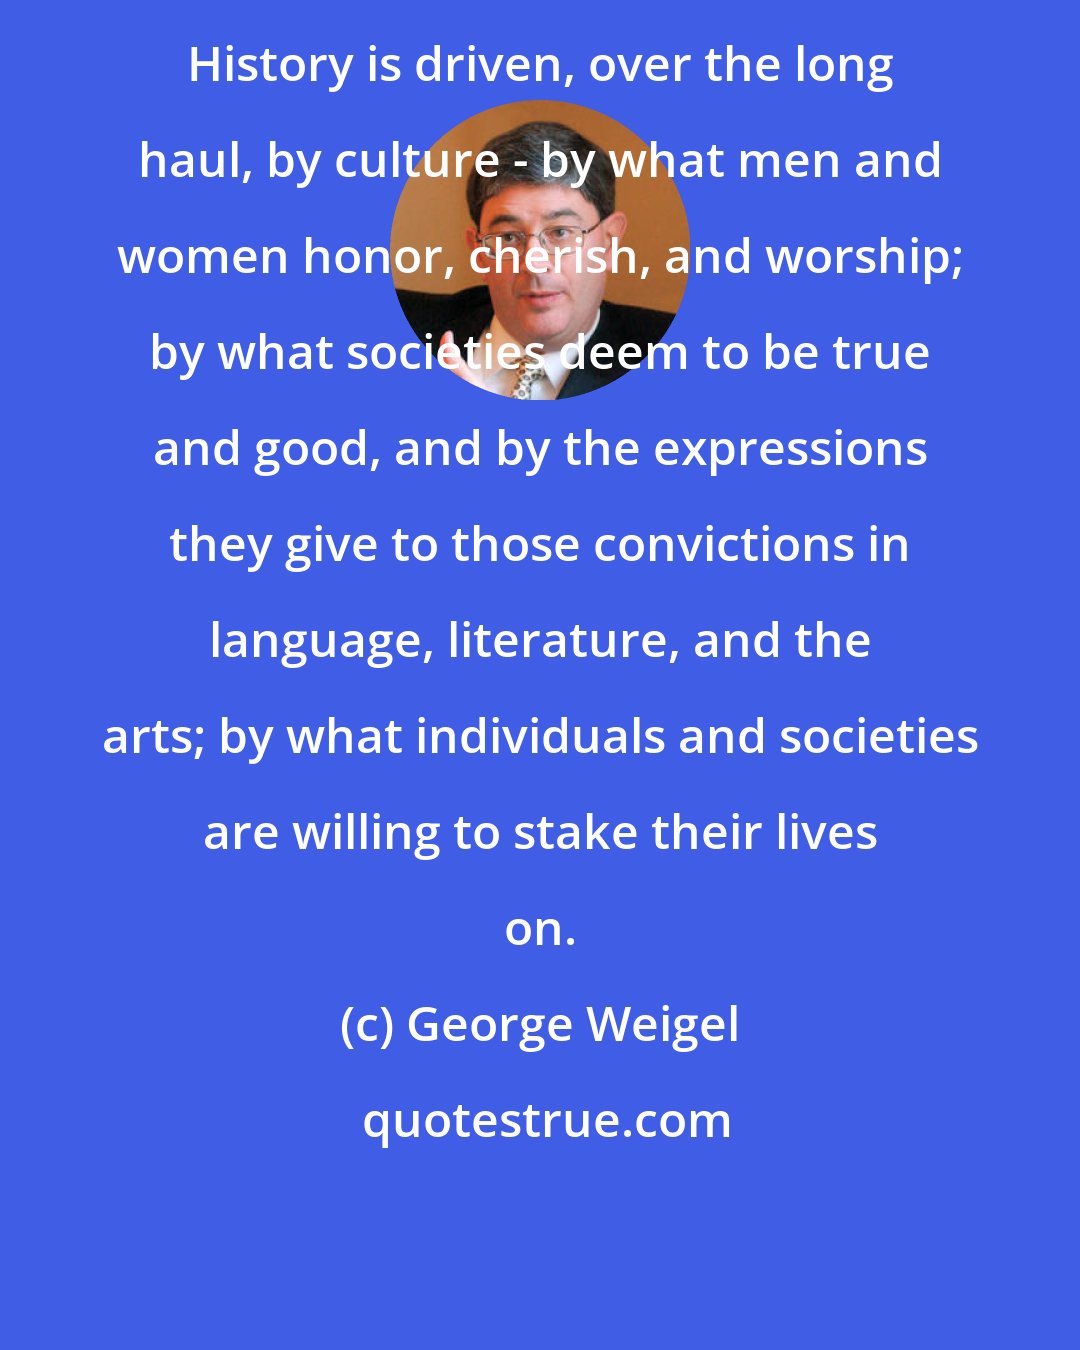 George Weigel: History is driven, over the long haul, by culture - by what men and women honor, cherish, and worship; by what societies deem to be true and good, and by the expressions they give to those convictions in language, literature, and the arts; by what individuals and societies are willing to stake their lives on.